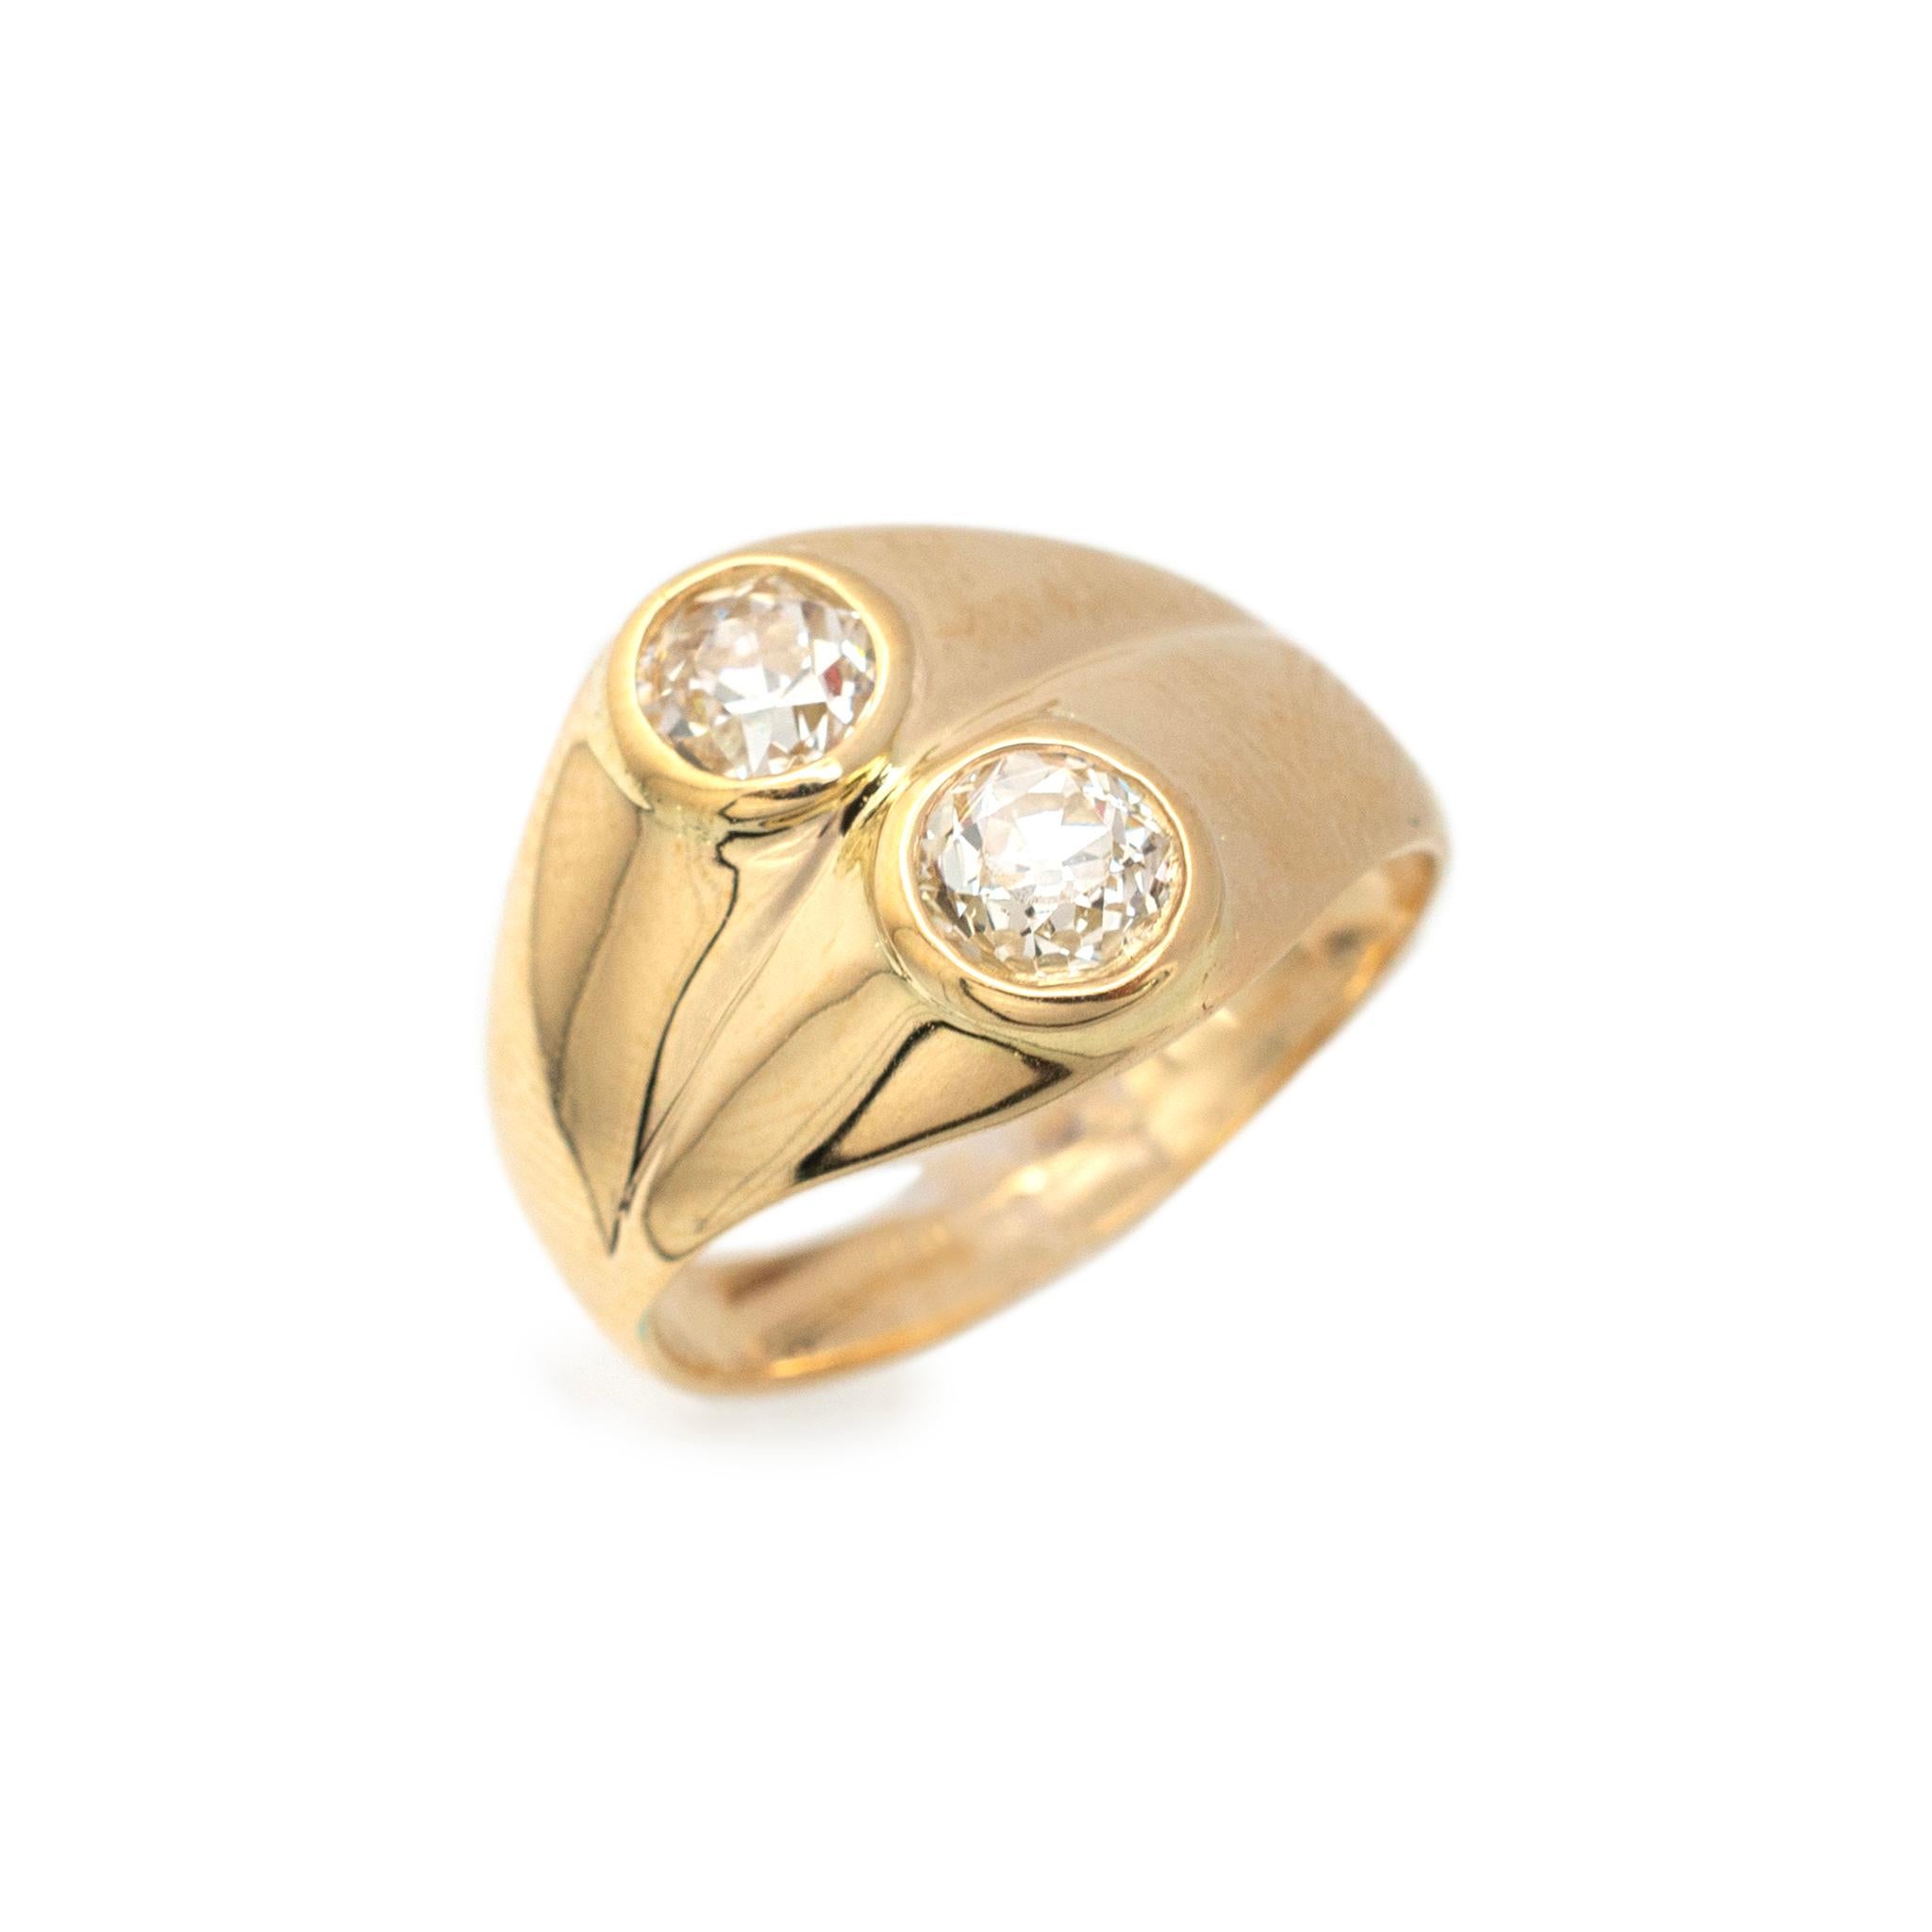 Gender: Ladies

Metal Type: 14K Yellow Gold

Size: 5.5

Shank Maximum Width: 13.10 mm tapering to 3.10 mm

Weight: 5.30 grams

Ladies 14K yellow gold diamond cocktail ring with a tapered comfort-fit shank.

Pre-owned in excellent condition. Might